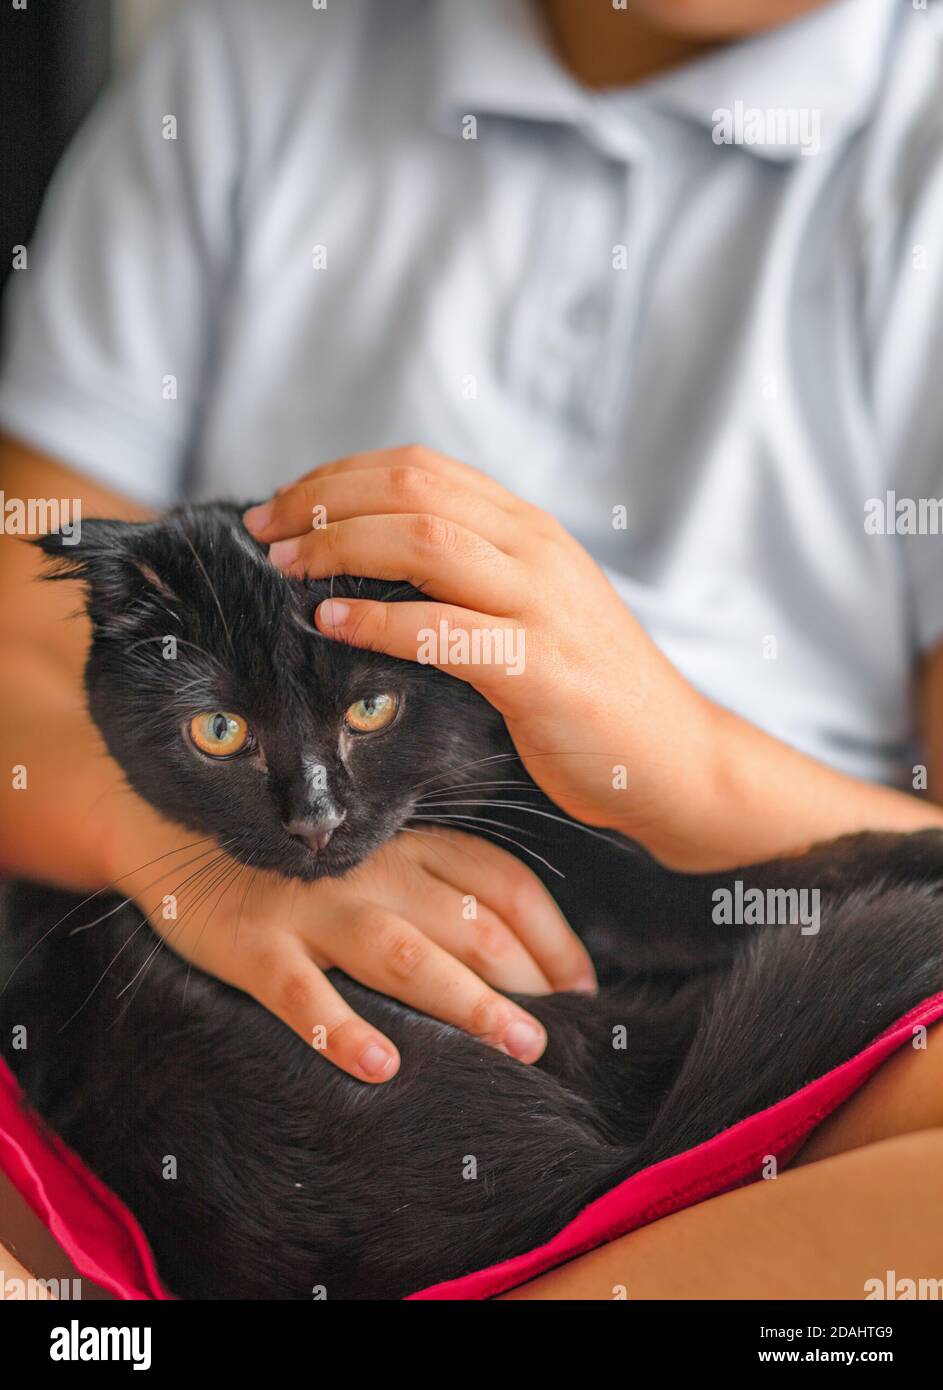 Small cute child that embraces with tenderness and love a black cat. Lazy weekend with cat at home. Stock Photo